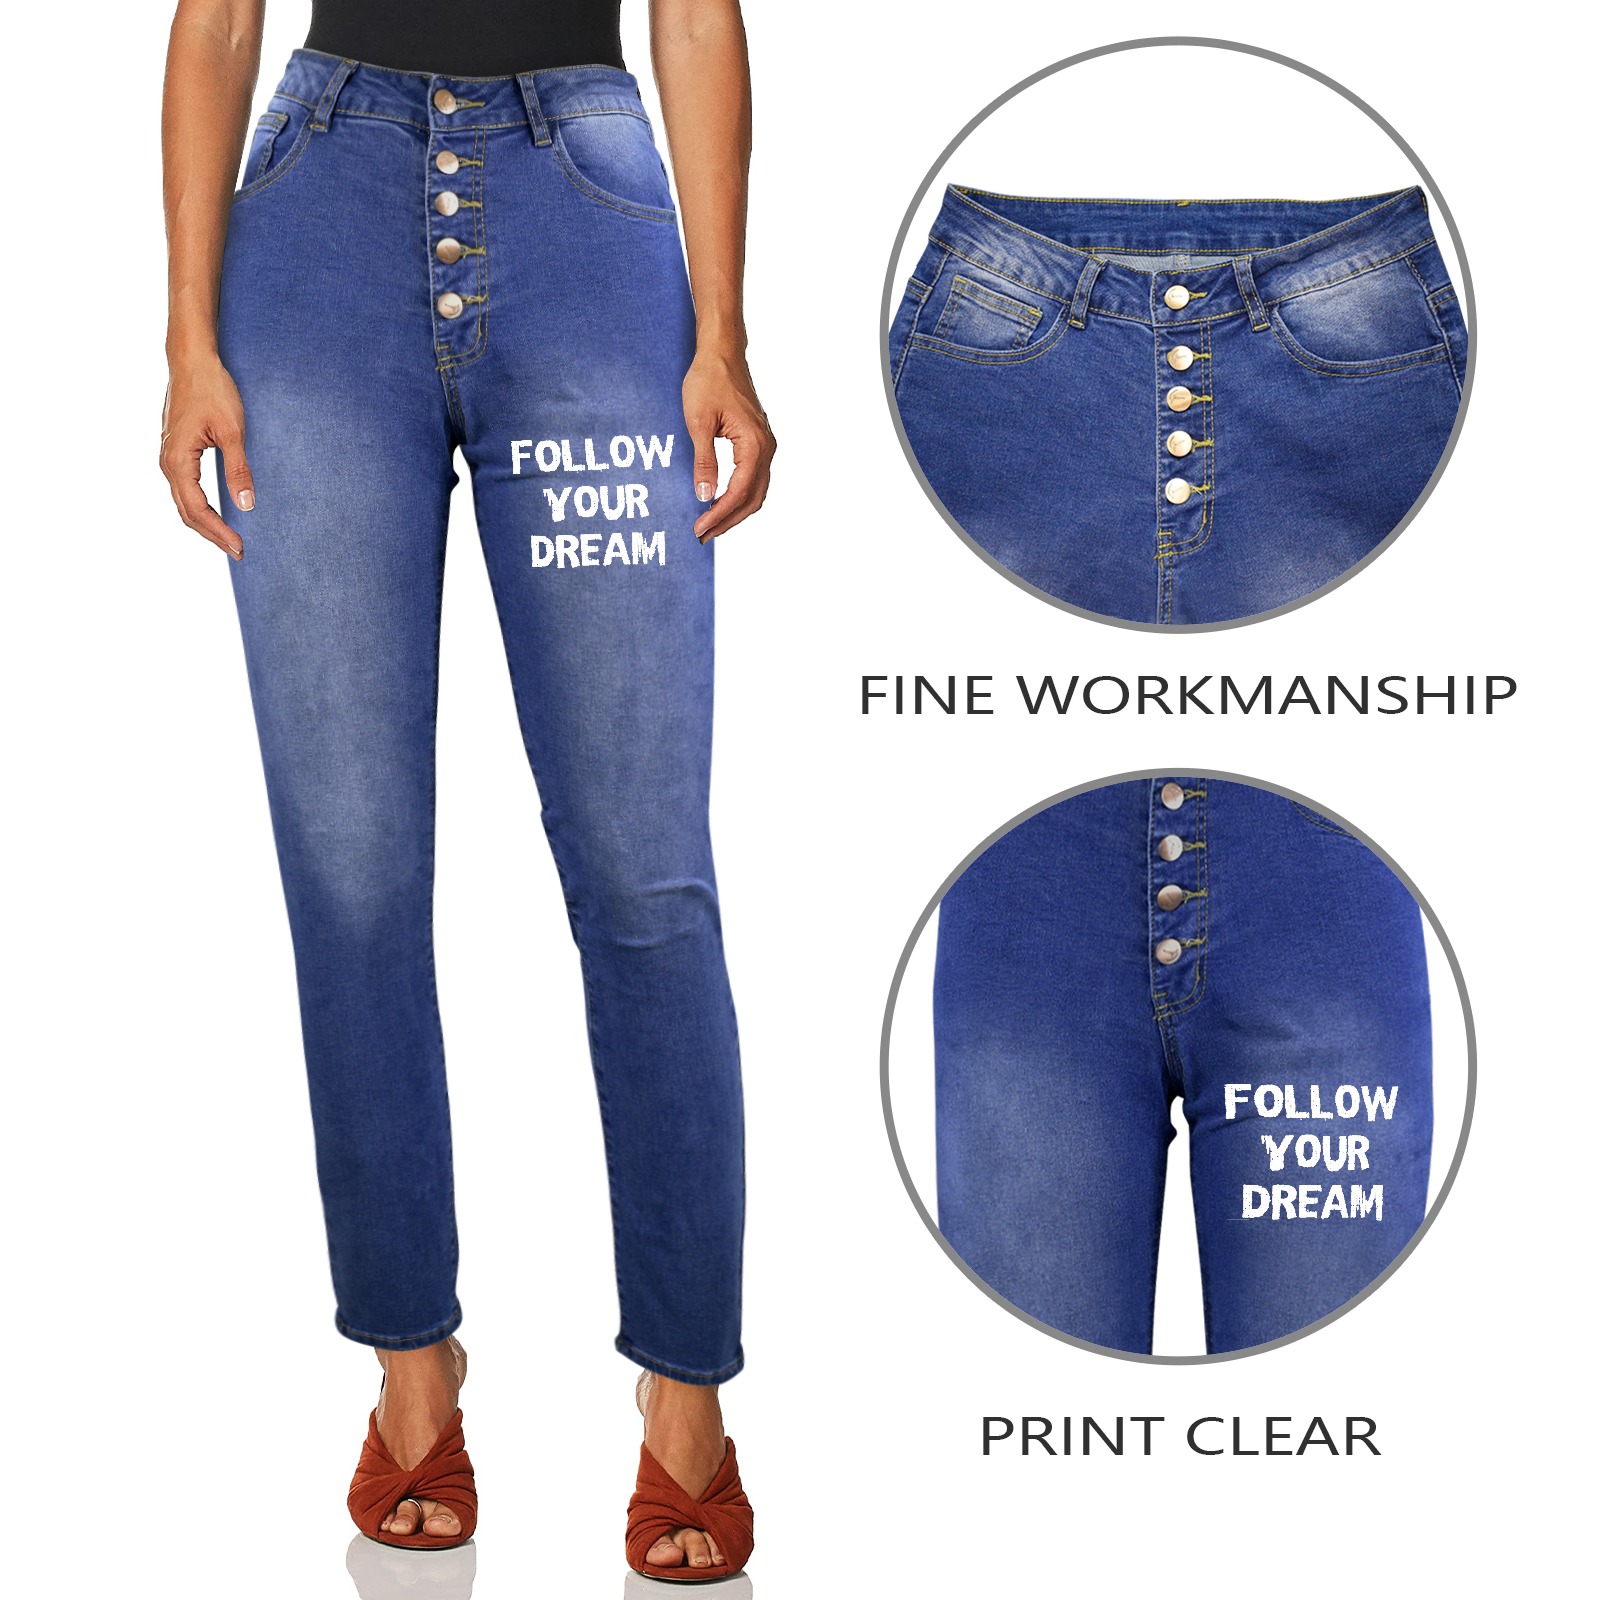 Follow your dream cool awesome white text. Women's Jeans (Front Printing)